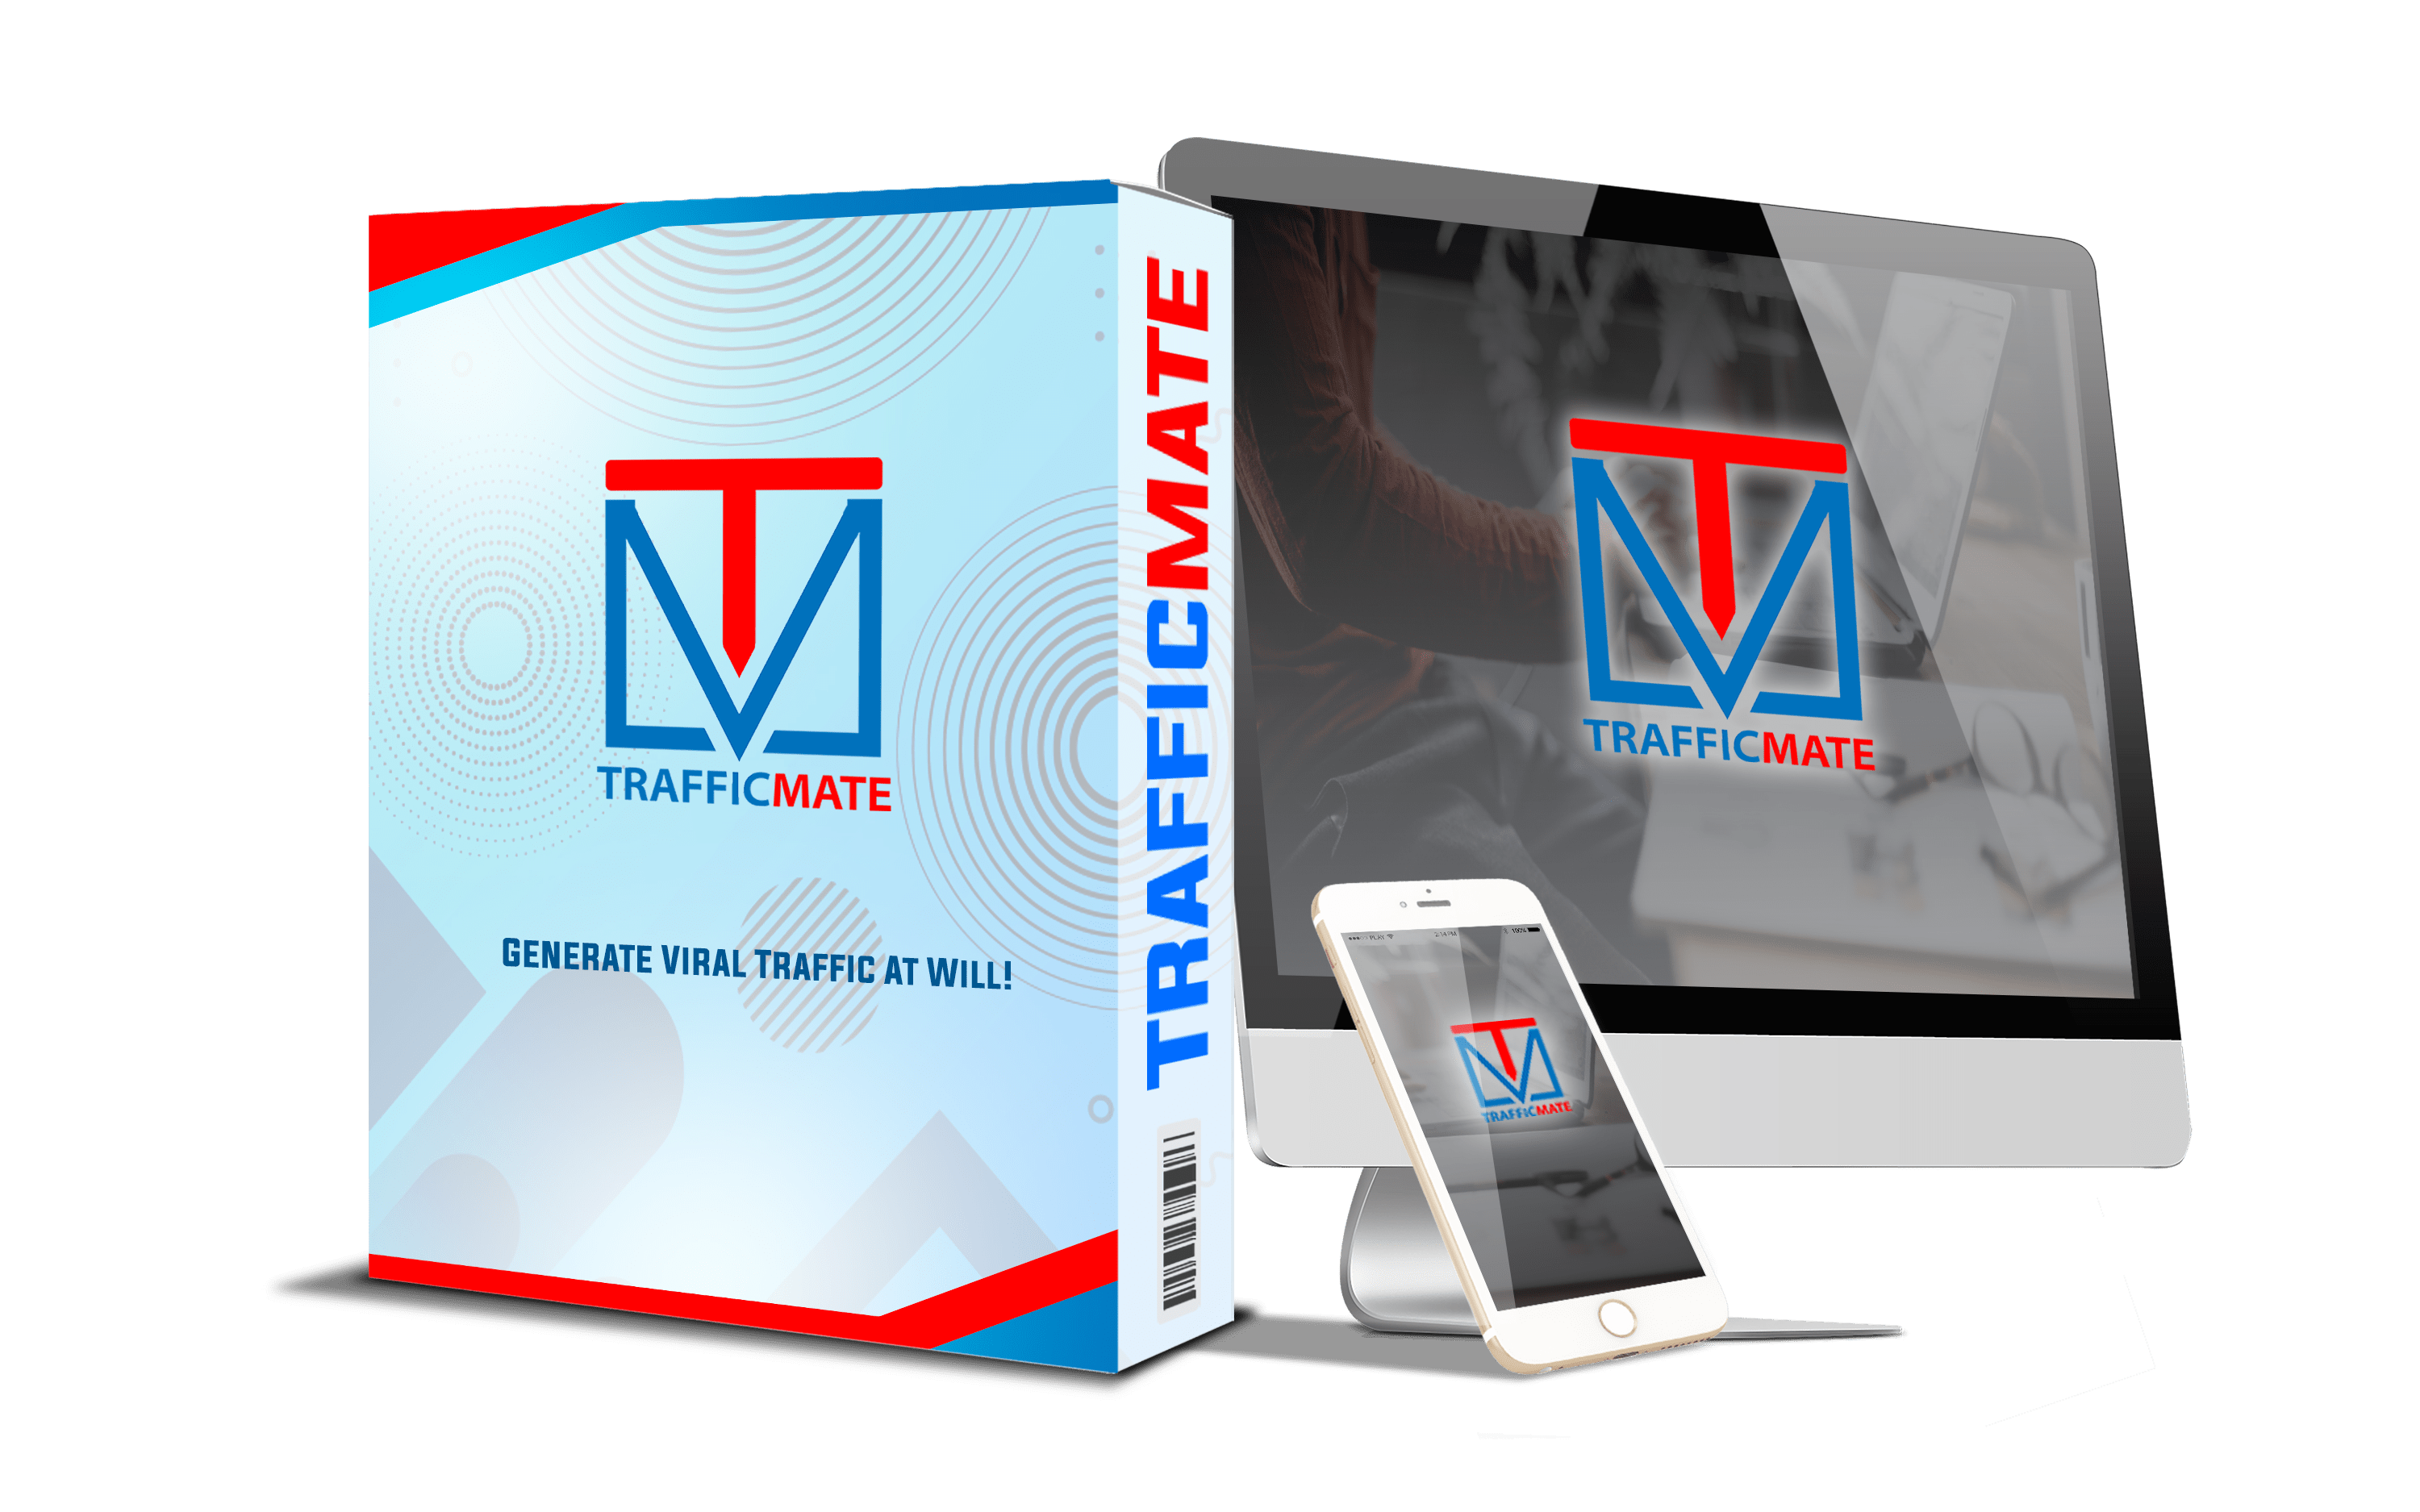 [GET] Traffic Mate – Generate Viral Traffic At Will! Download